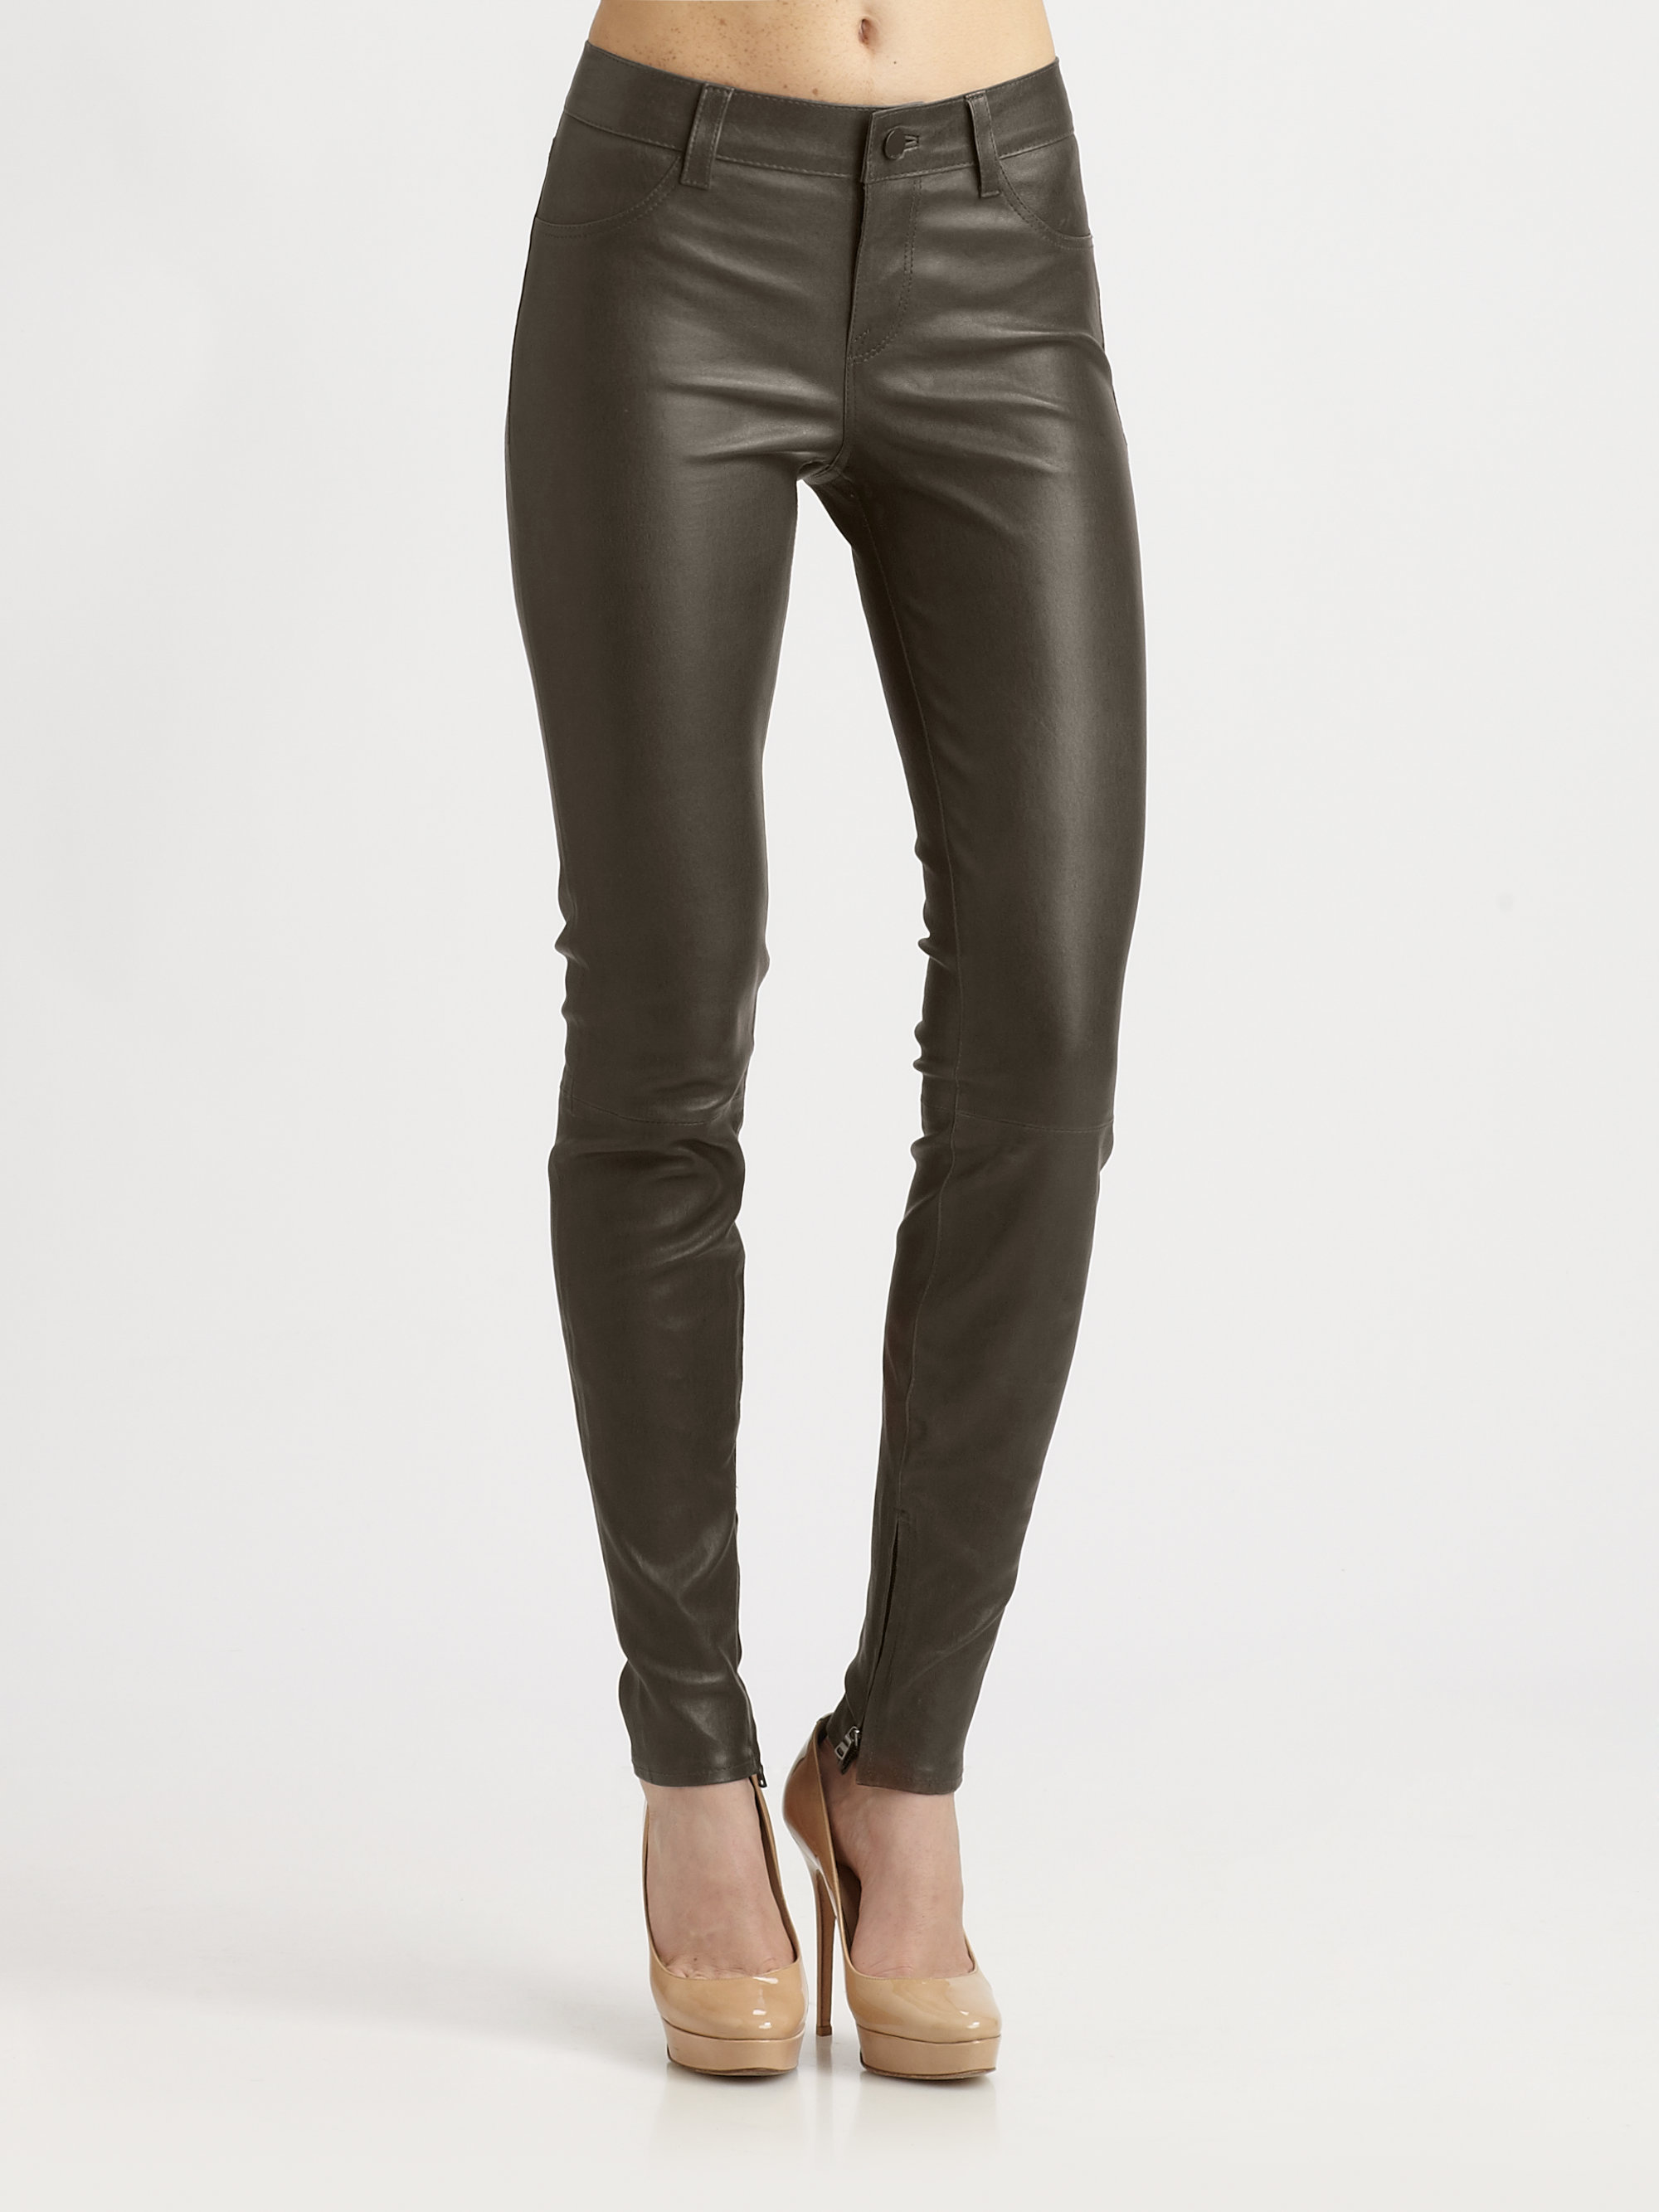 Vince Washed Leather Pants in Olive (Black) - Lyst